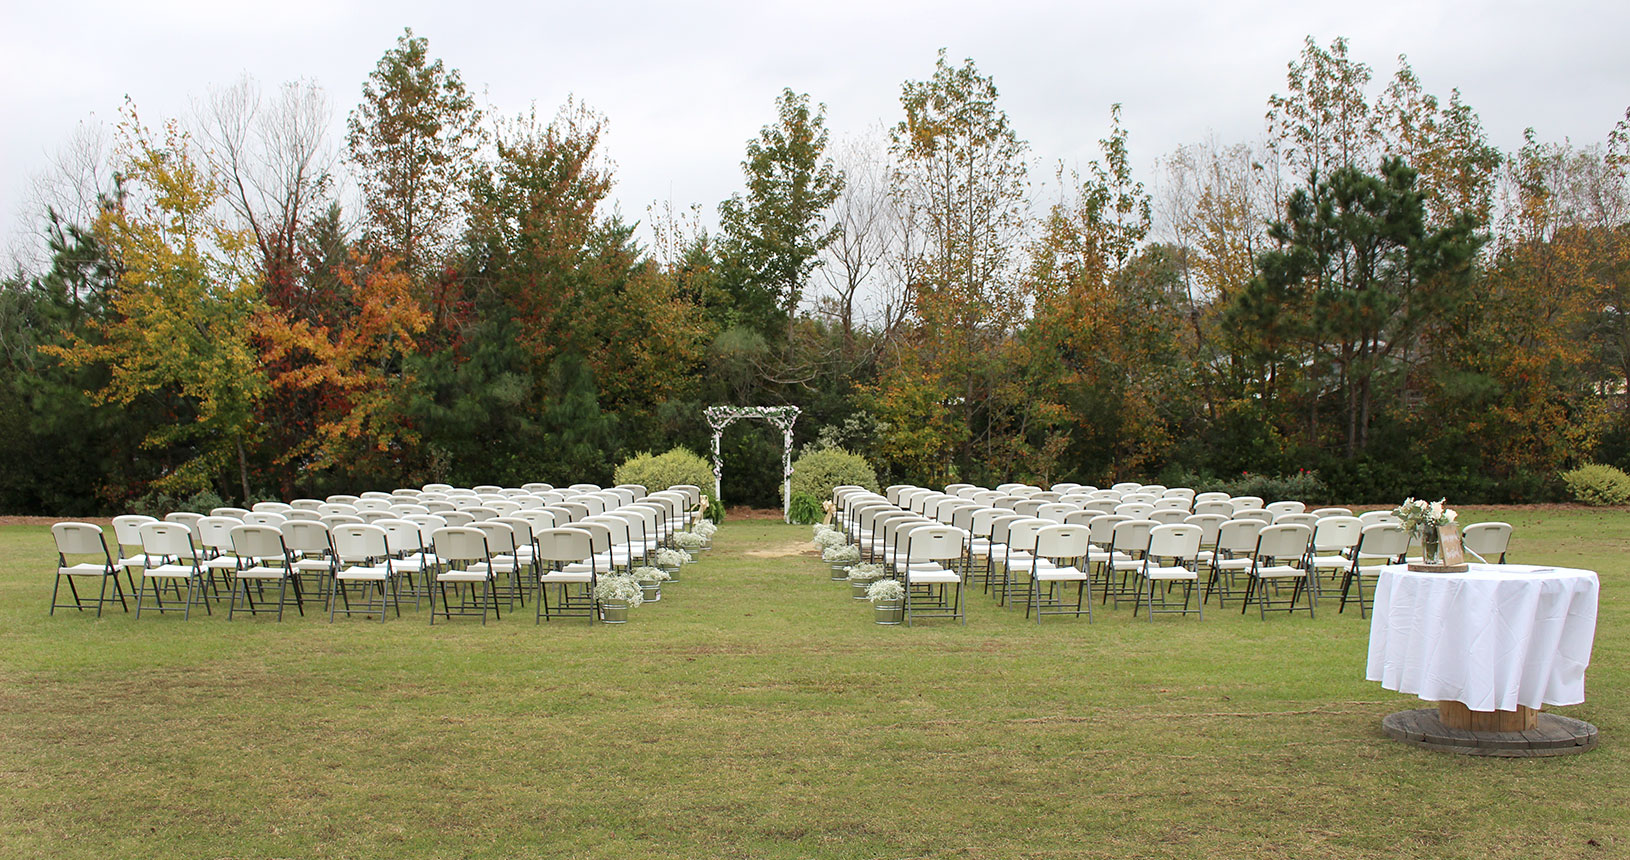 A wedding ceremony with white chairs and trees.